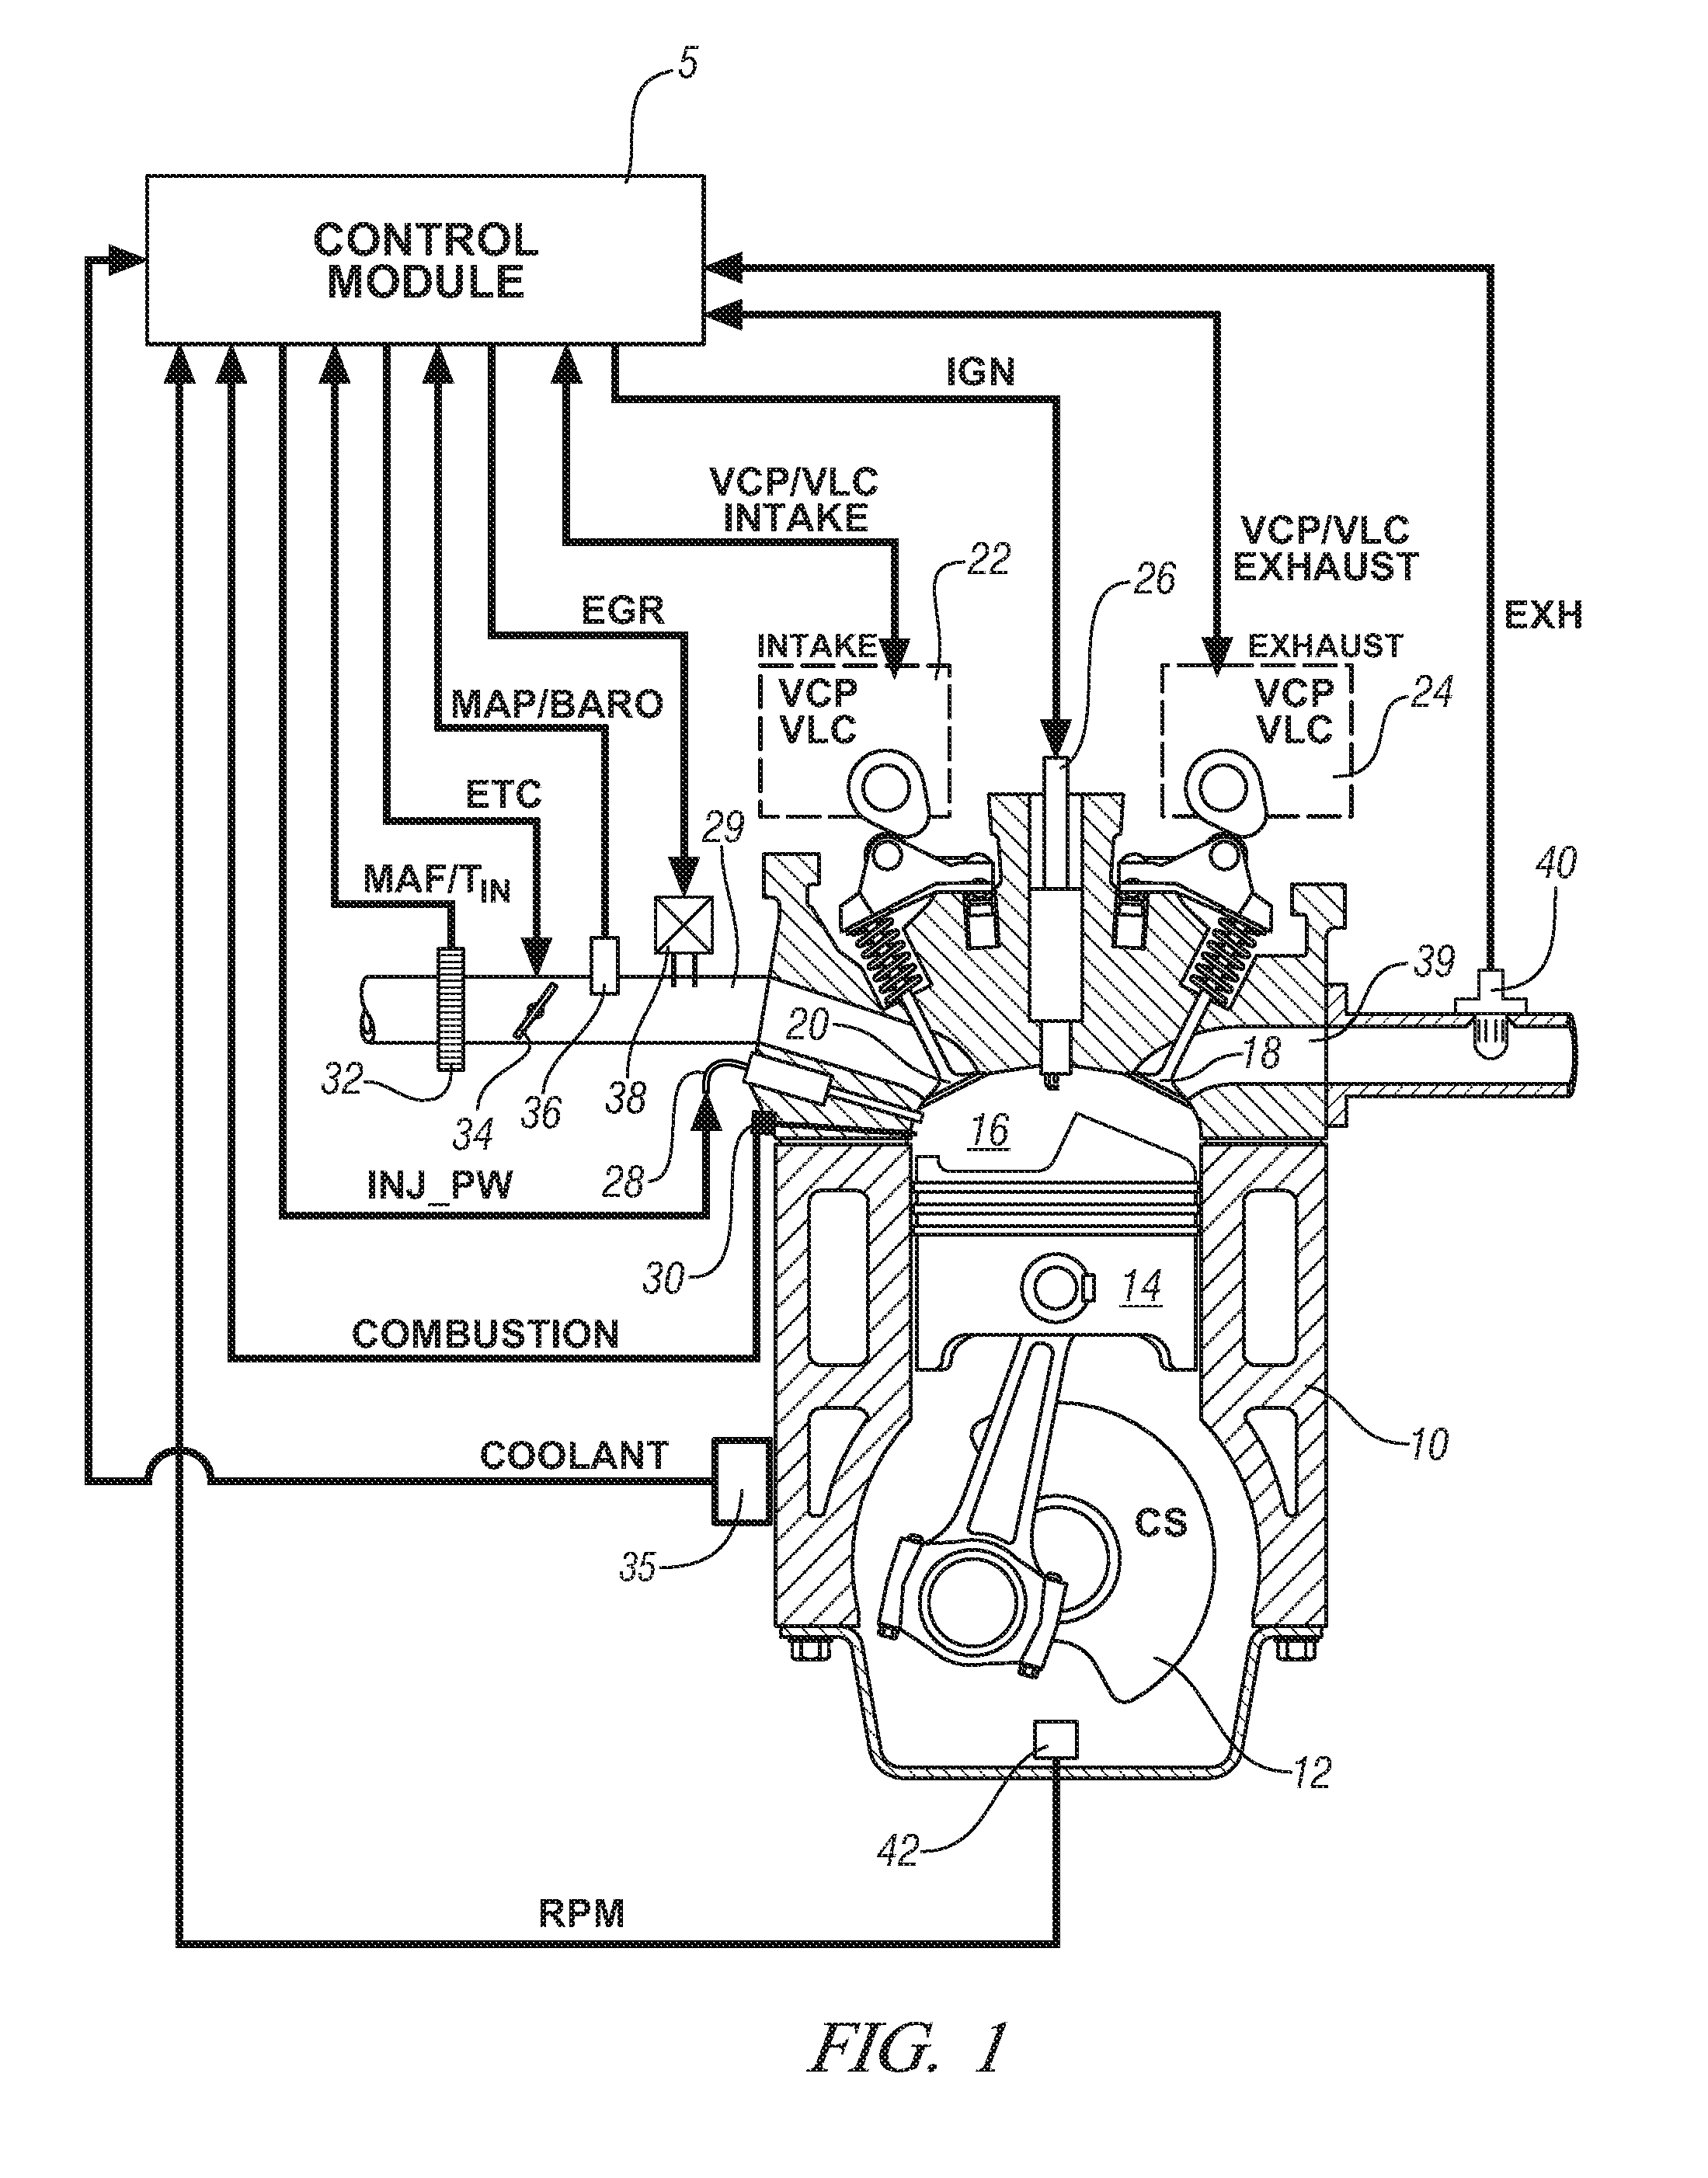 Method and apparatus to control operation of a homogeneous charge compression-ignition engine